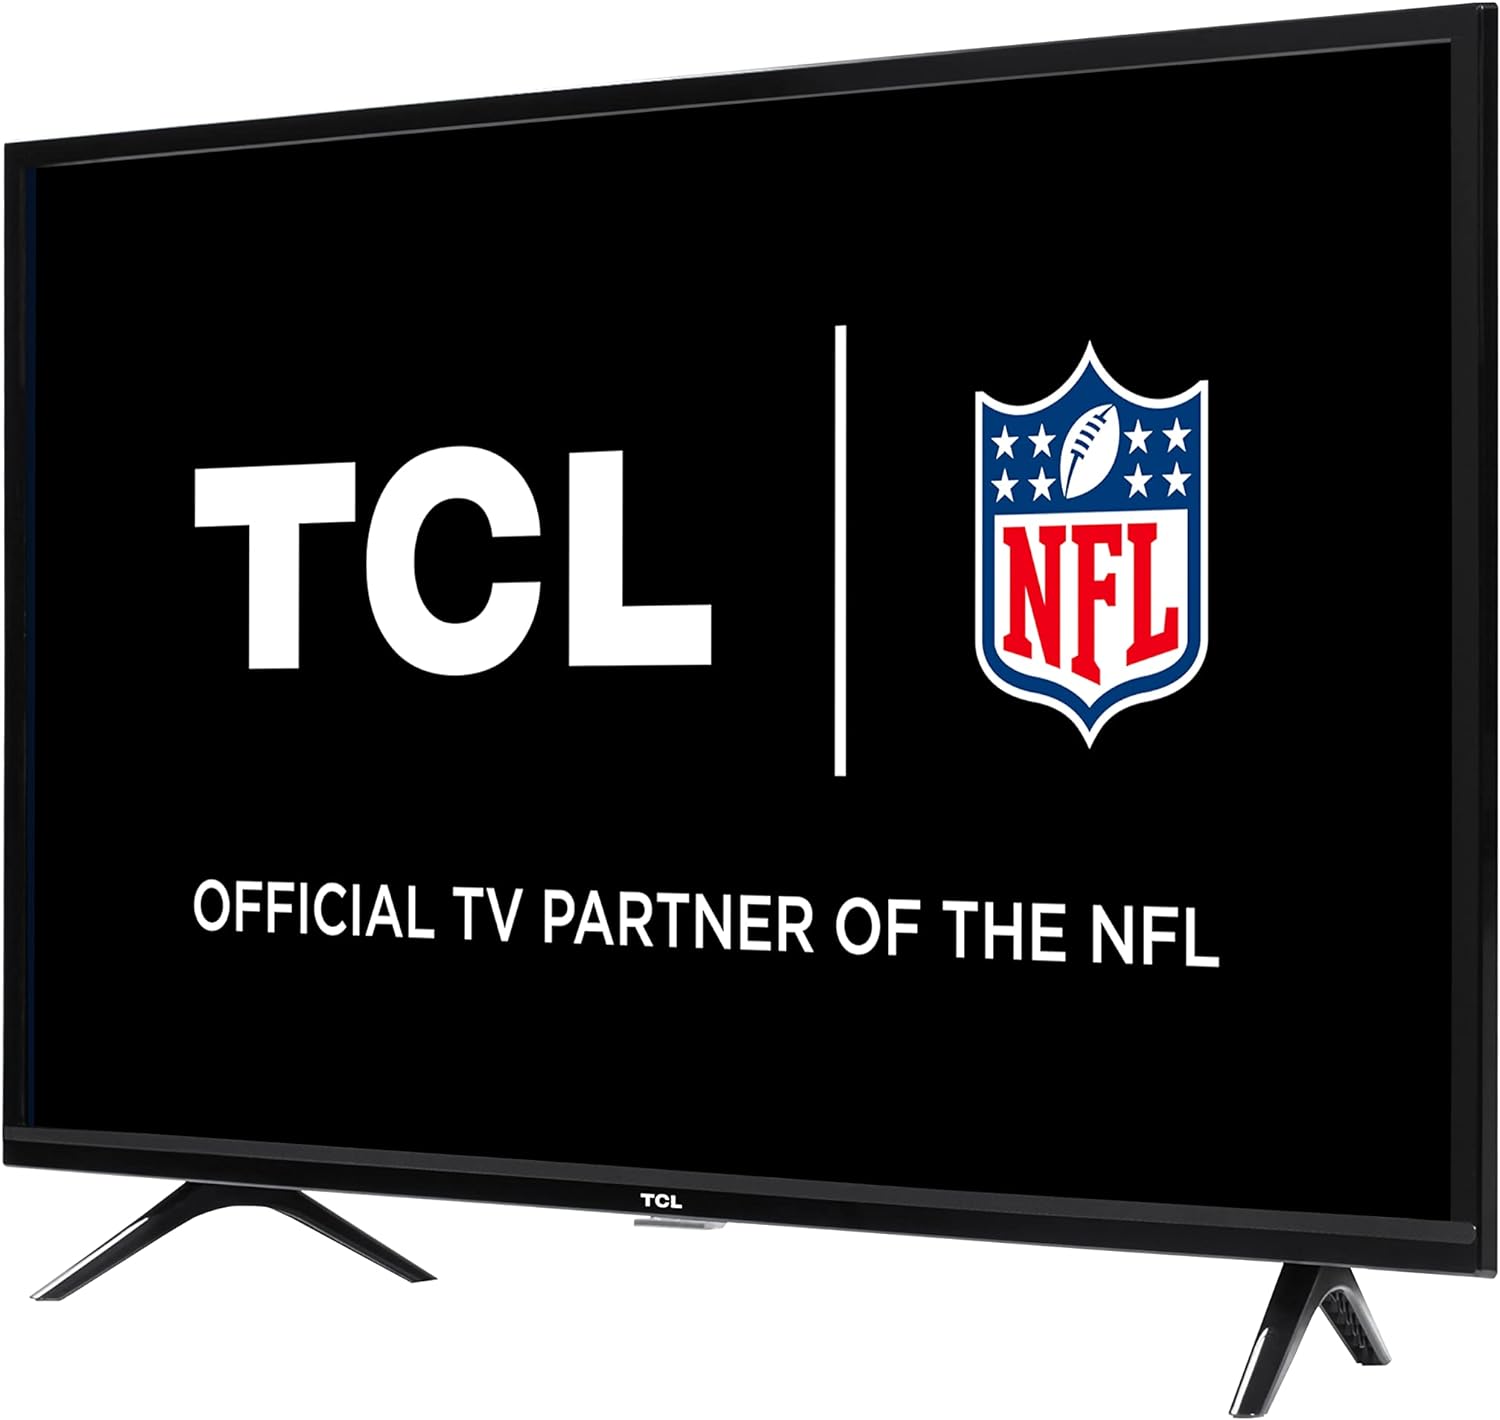 TCL 40" Class 3-Series HD LED Smart Android TV - 40S334-CA (Refurbished)